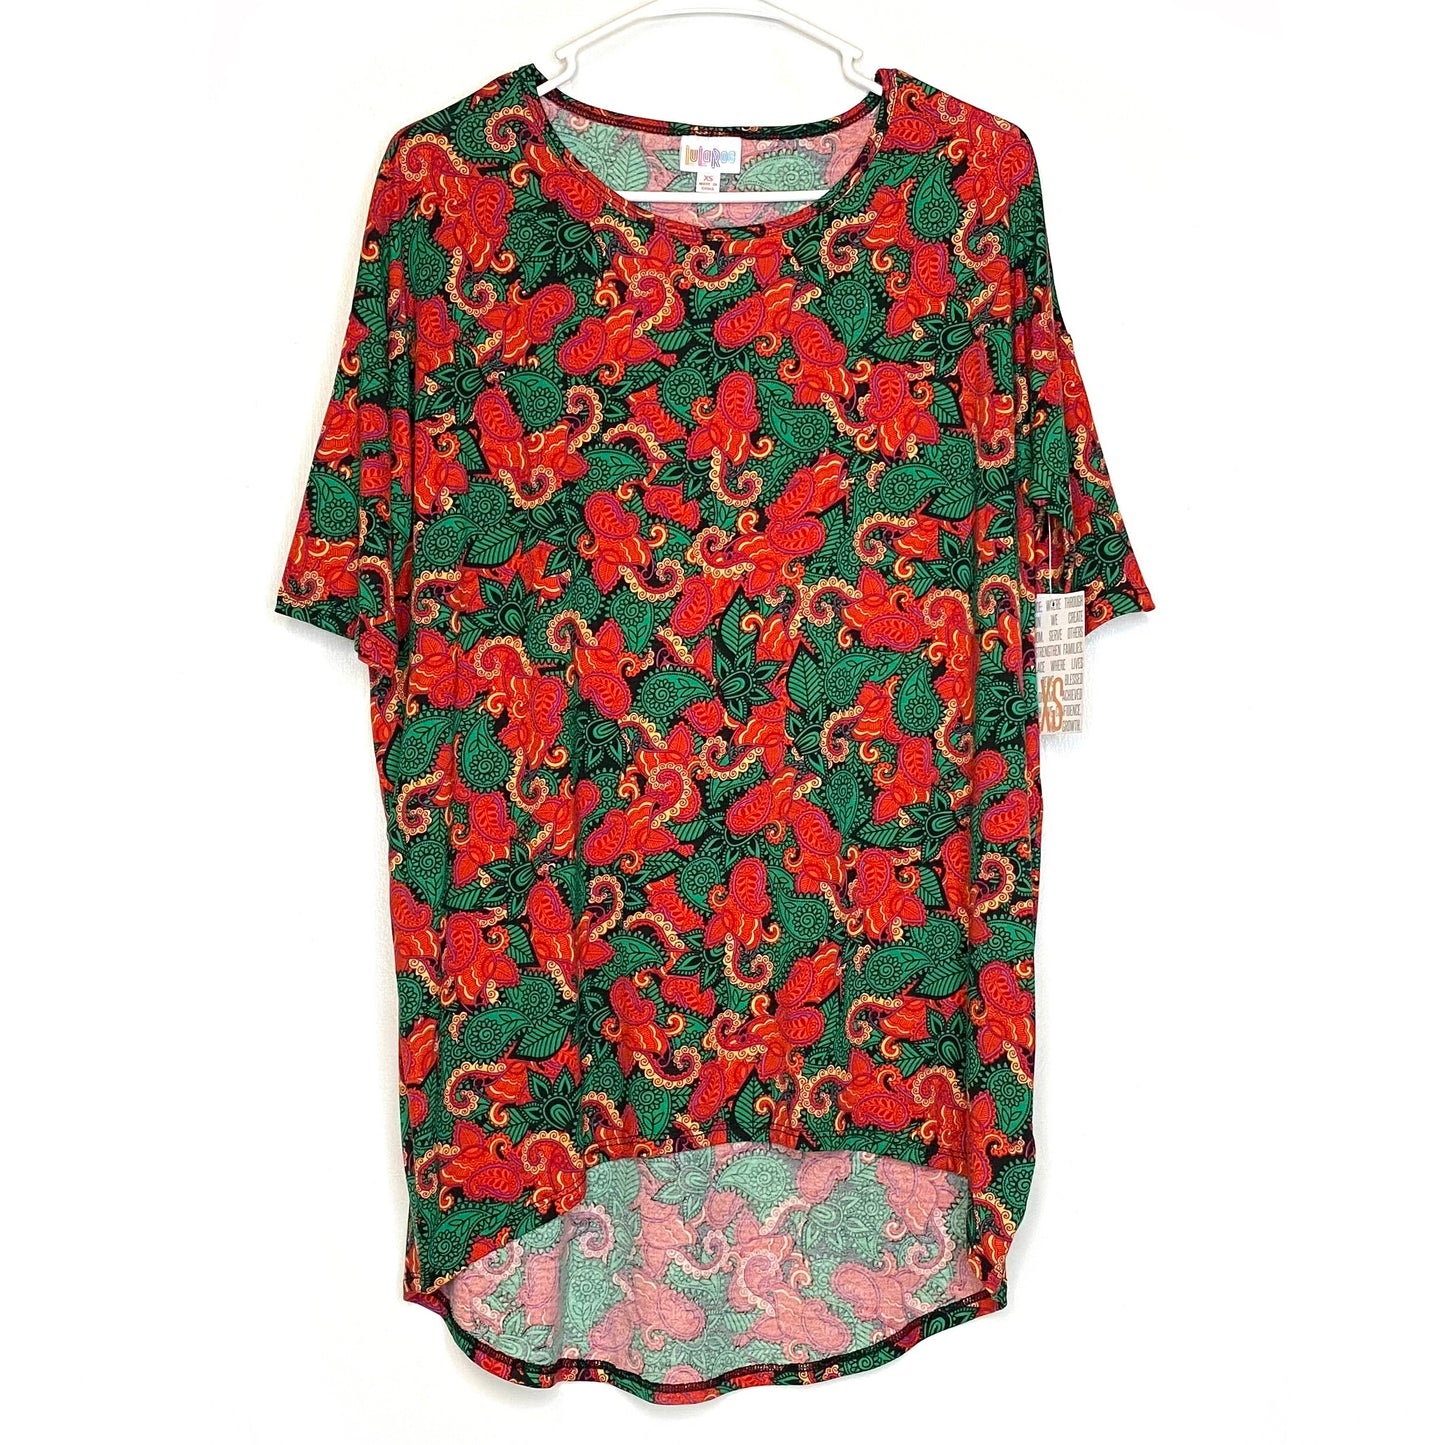 LuLaRoe Womens XS Irma Red/Green/Black Paisley/Floral S/s Tunic Top NWT